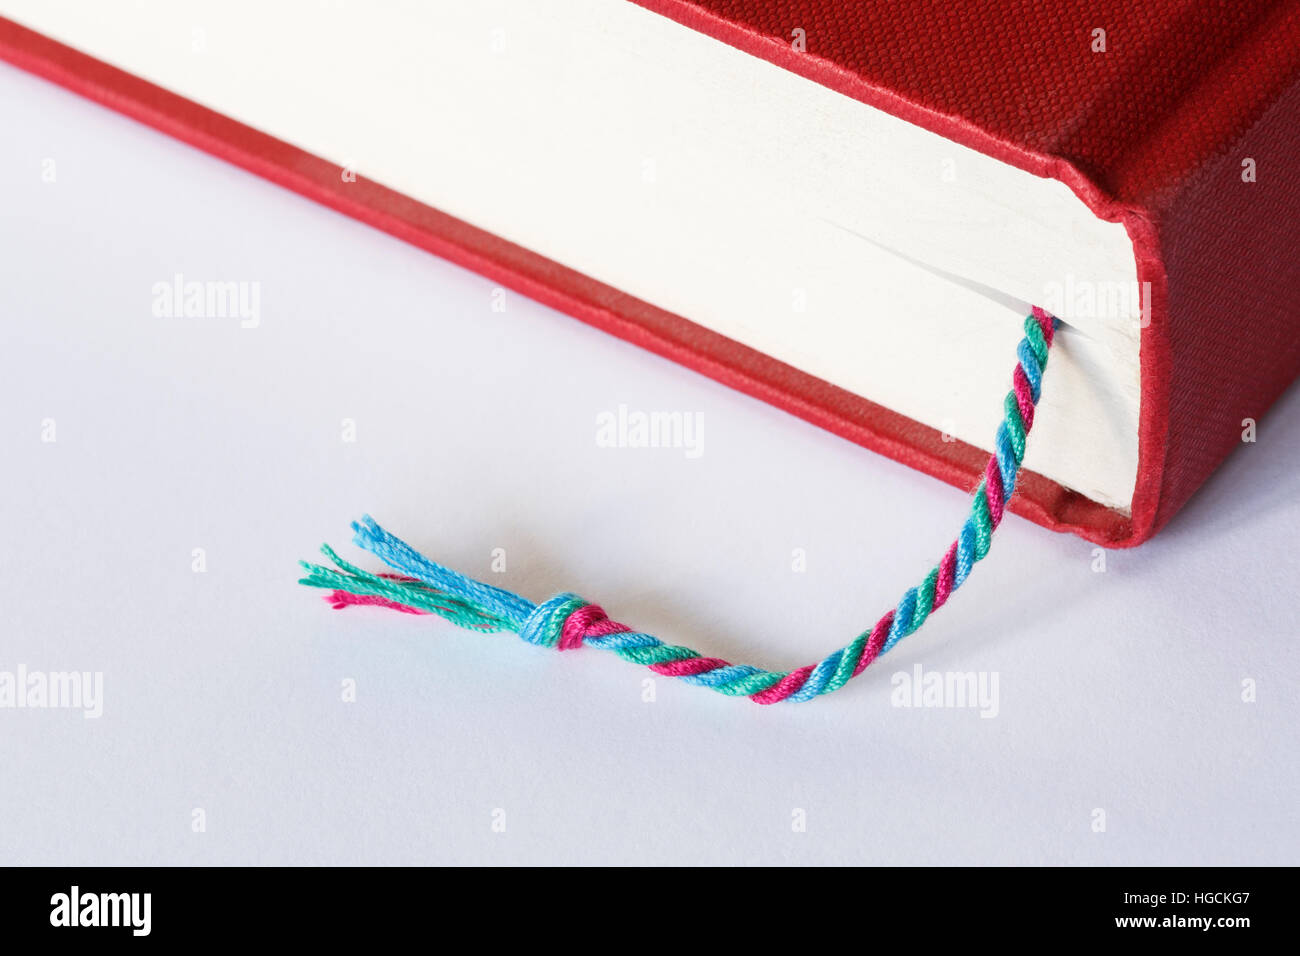 Bookmark marking a page in a closed red hardback book on a plain white table surface Stock Photo